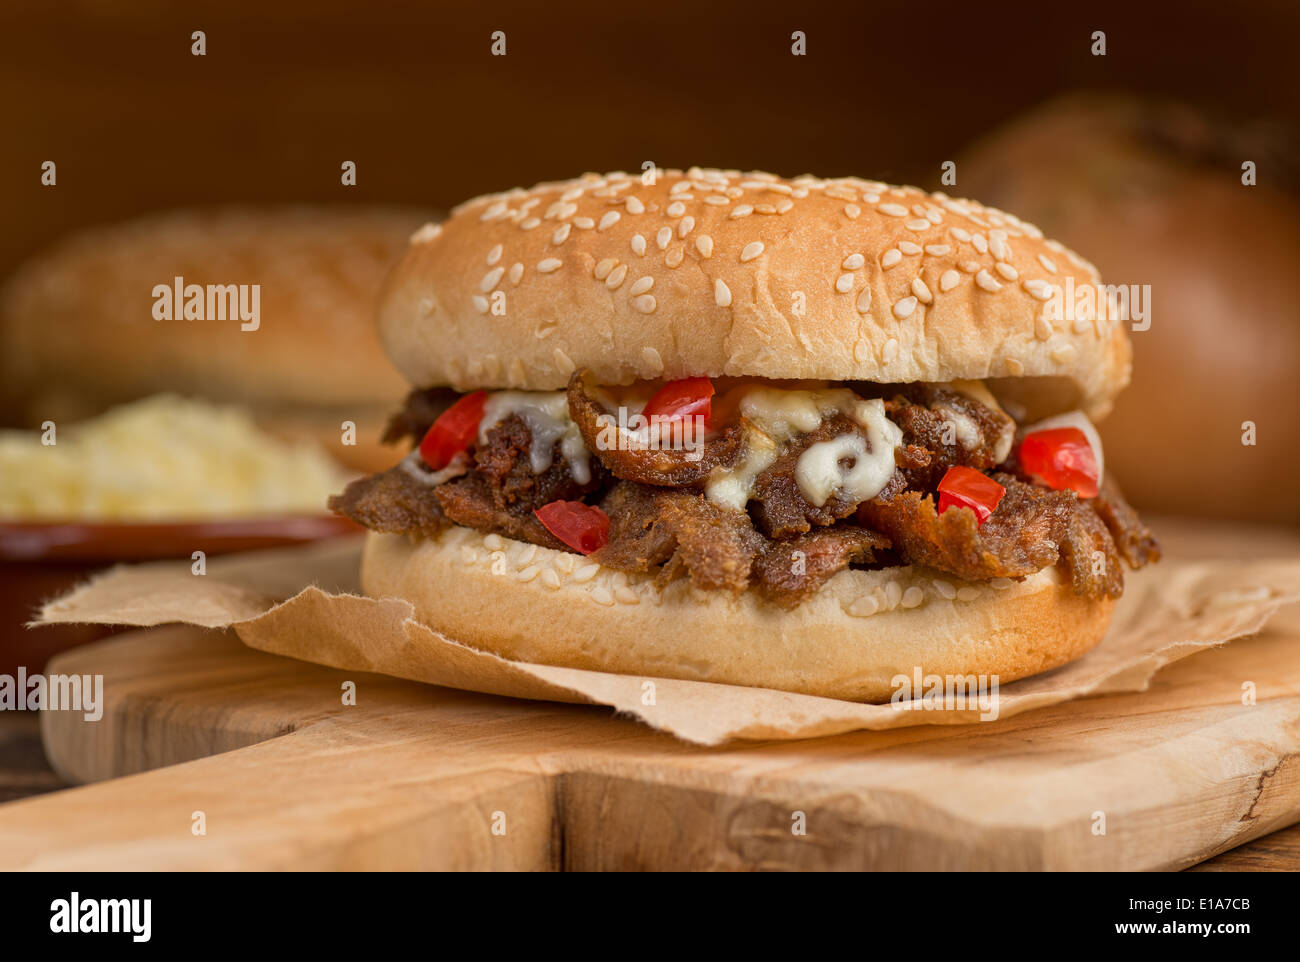 A donair burger with melted cheese, tomato, onion, and sauce. Stock Photo